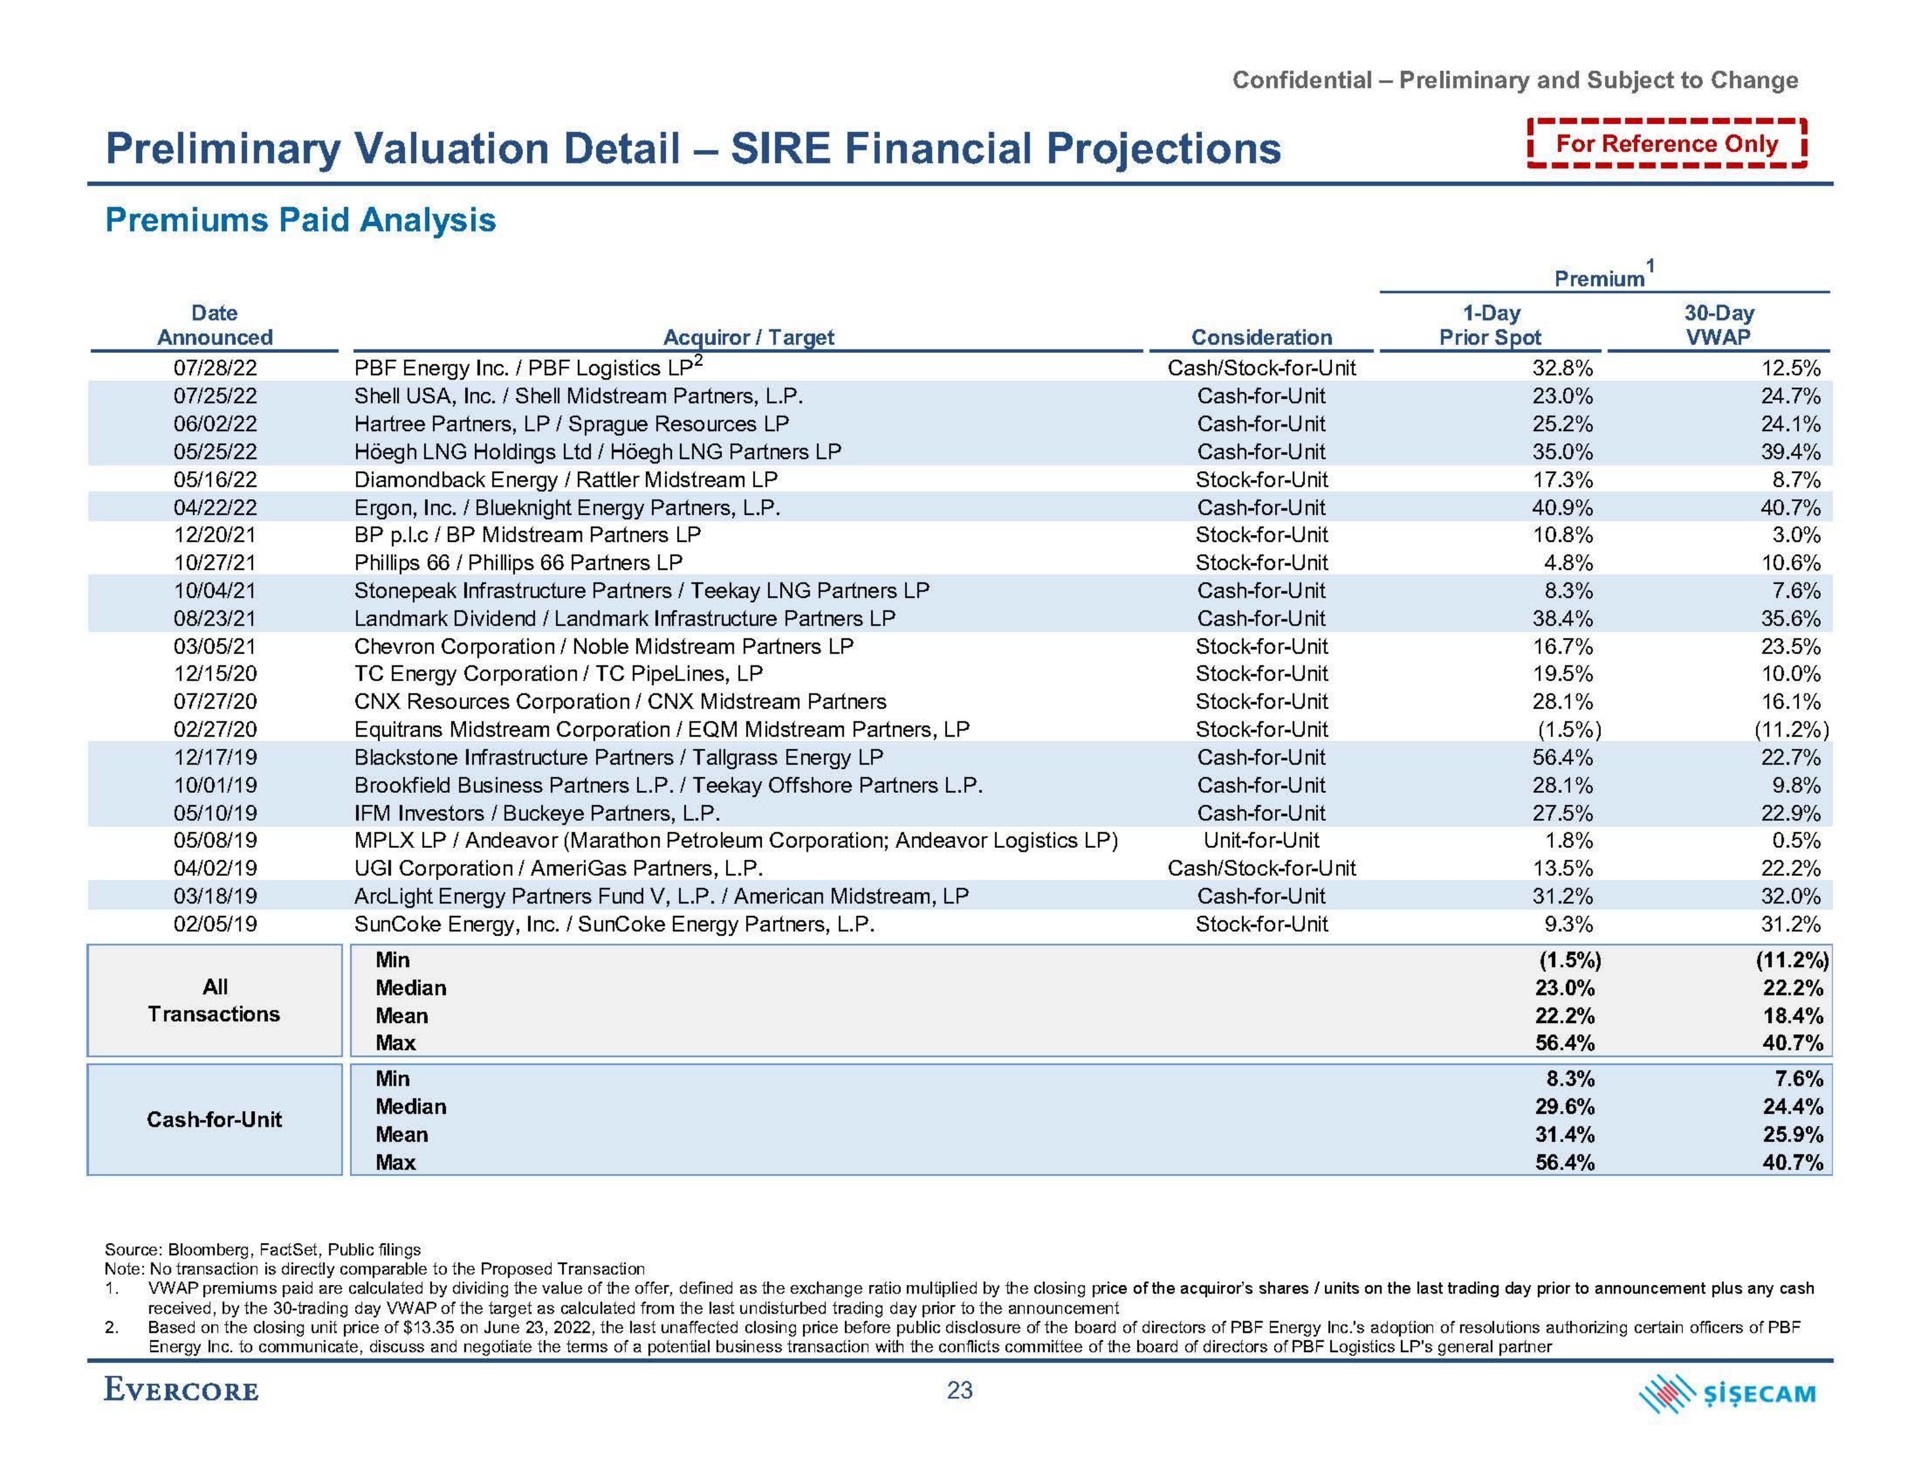 preliminary valuation detail sire financial projections premiums paid analysis mean | Evercore